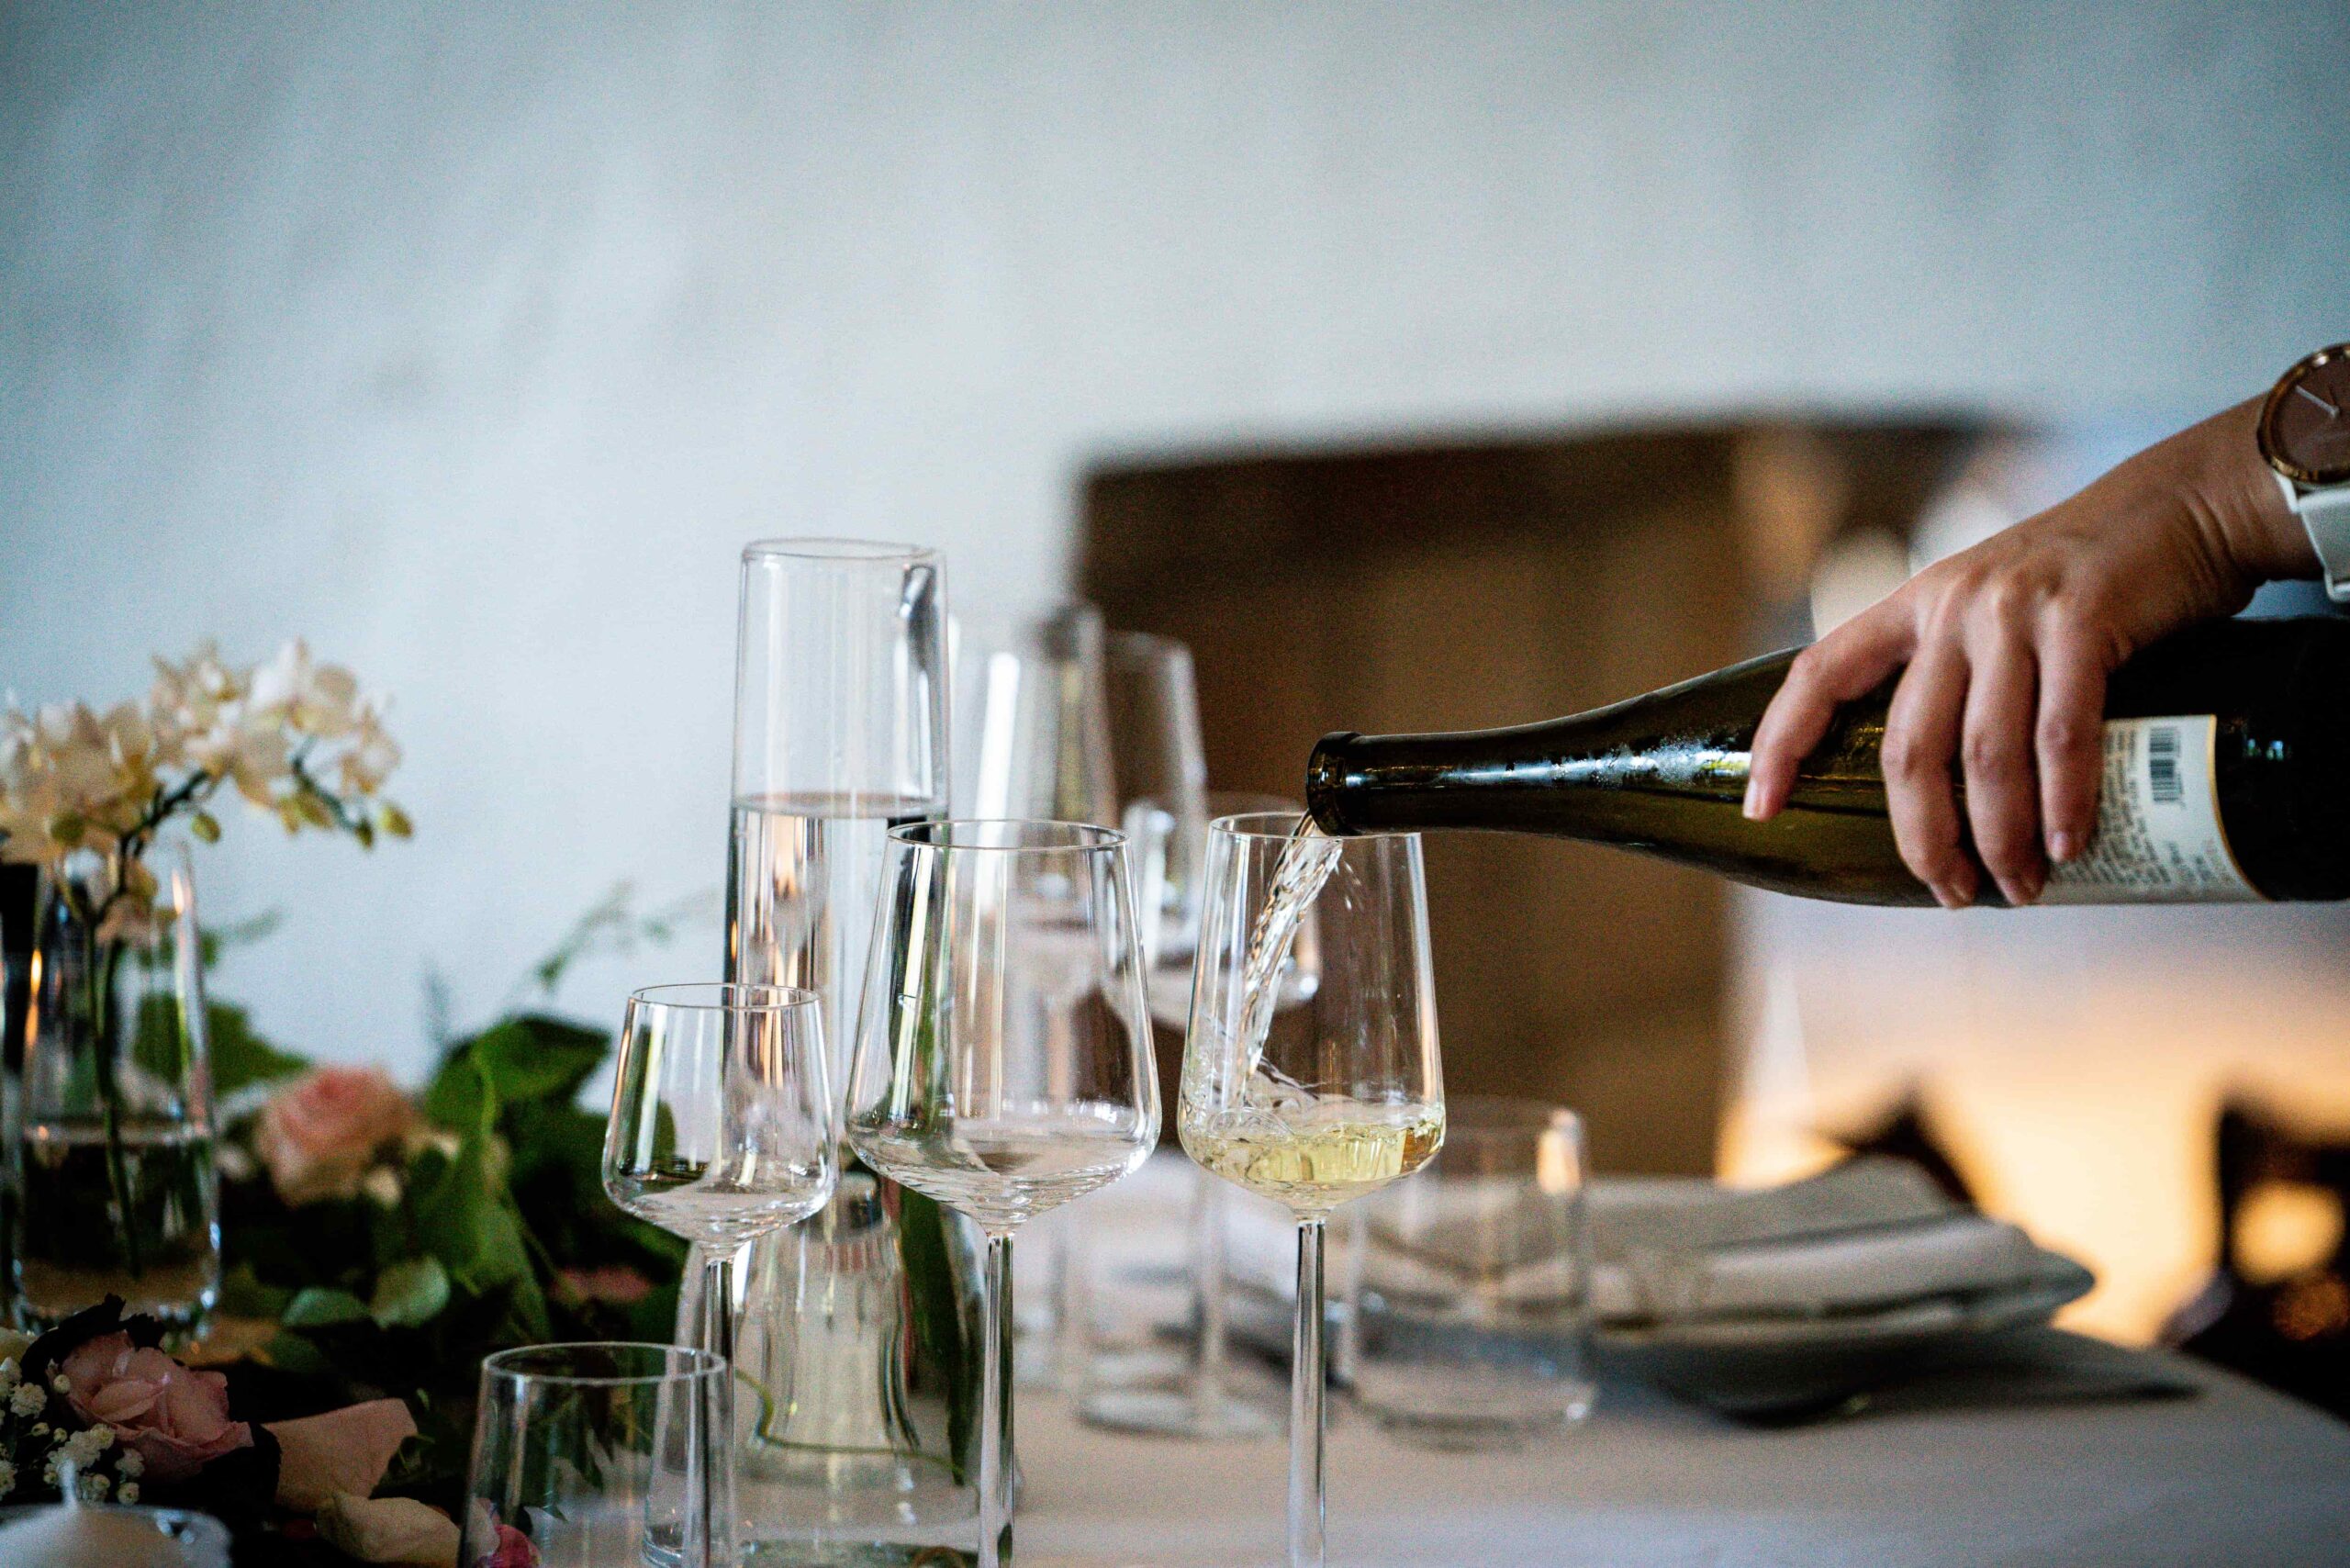 A waiter pouring a glass of white wine at a restaurant dining table